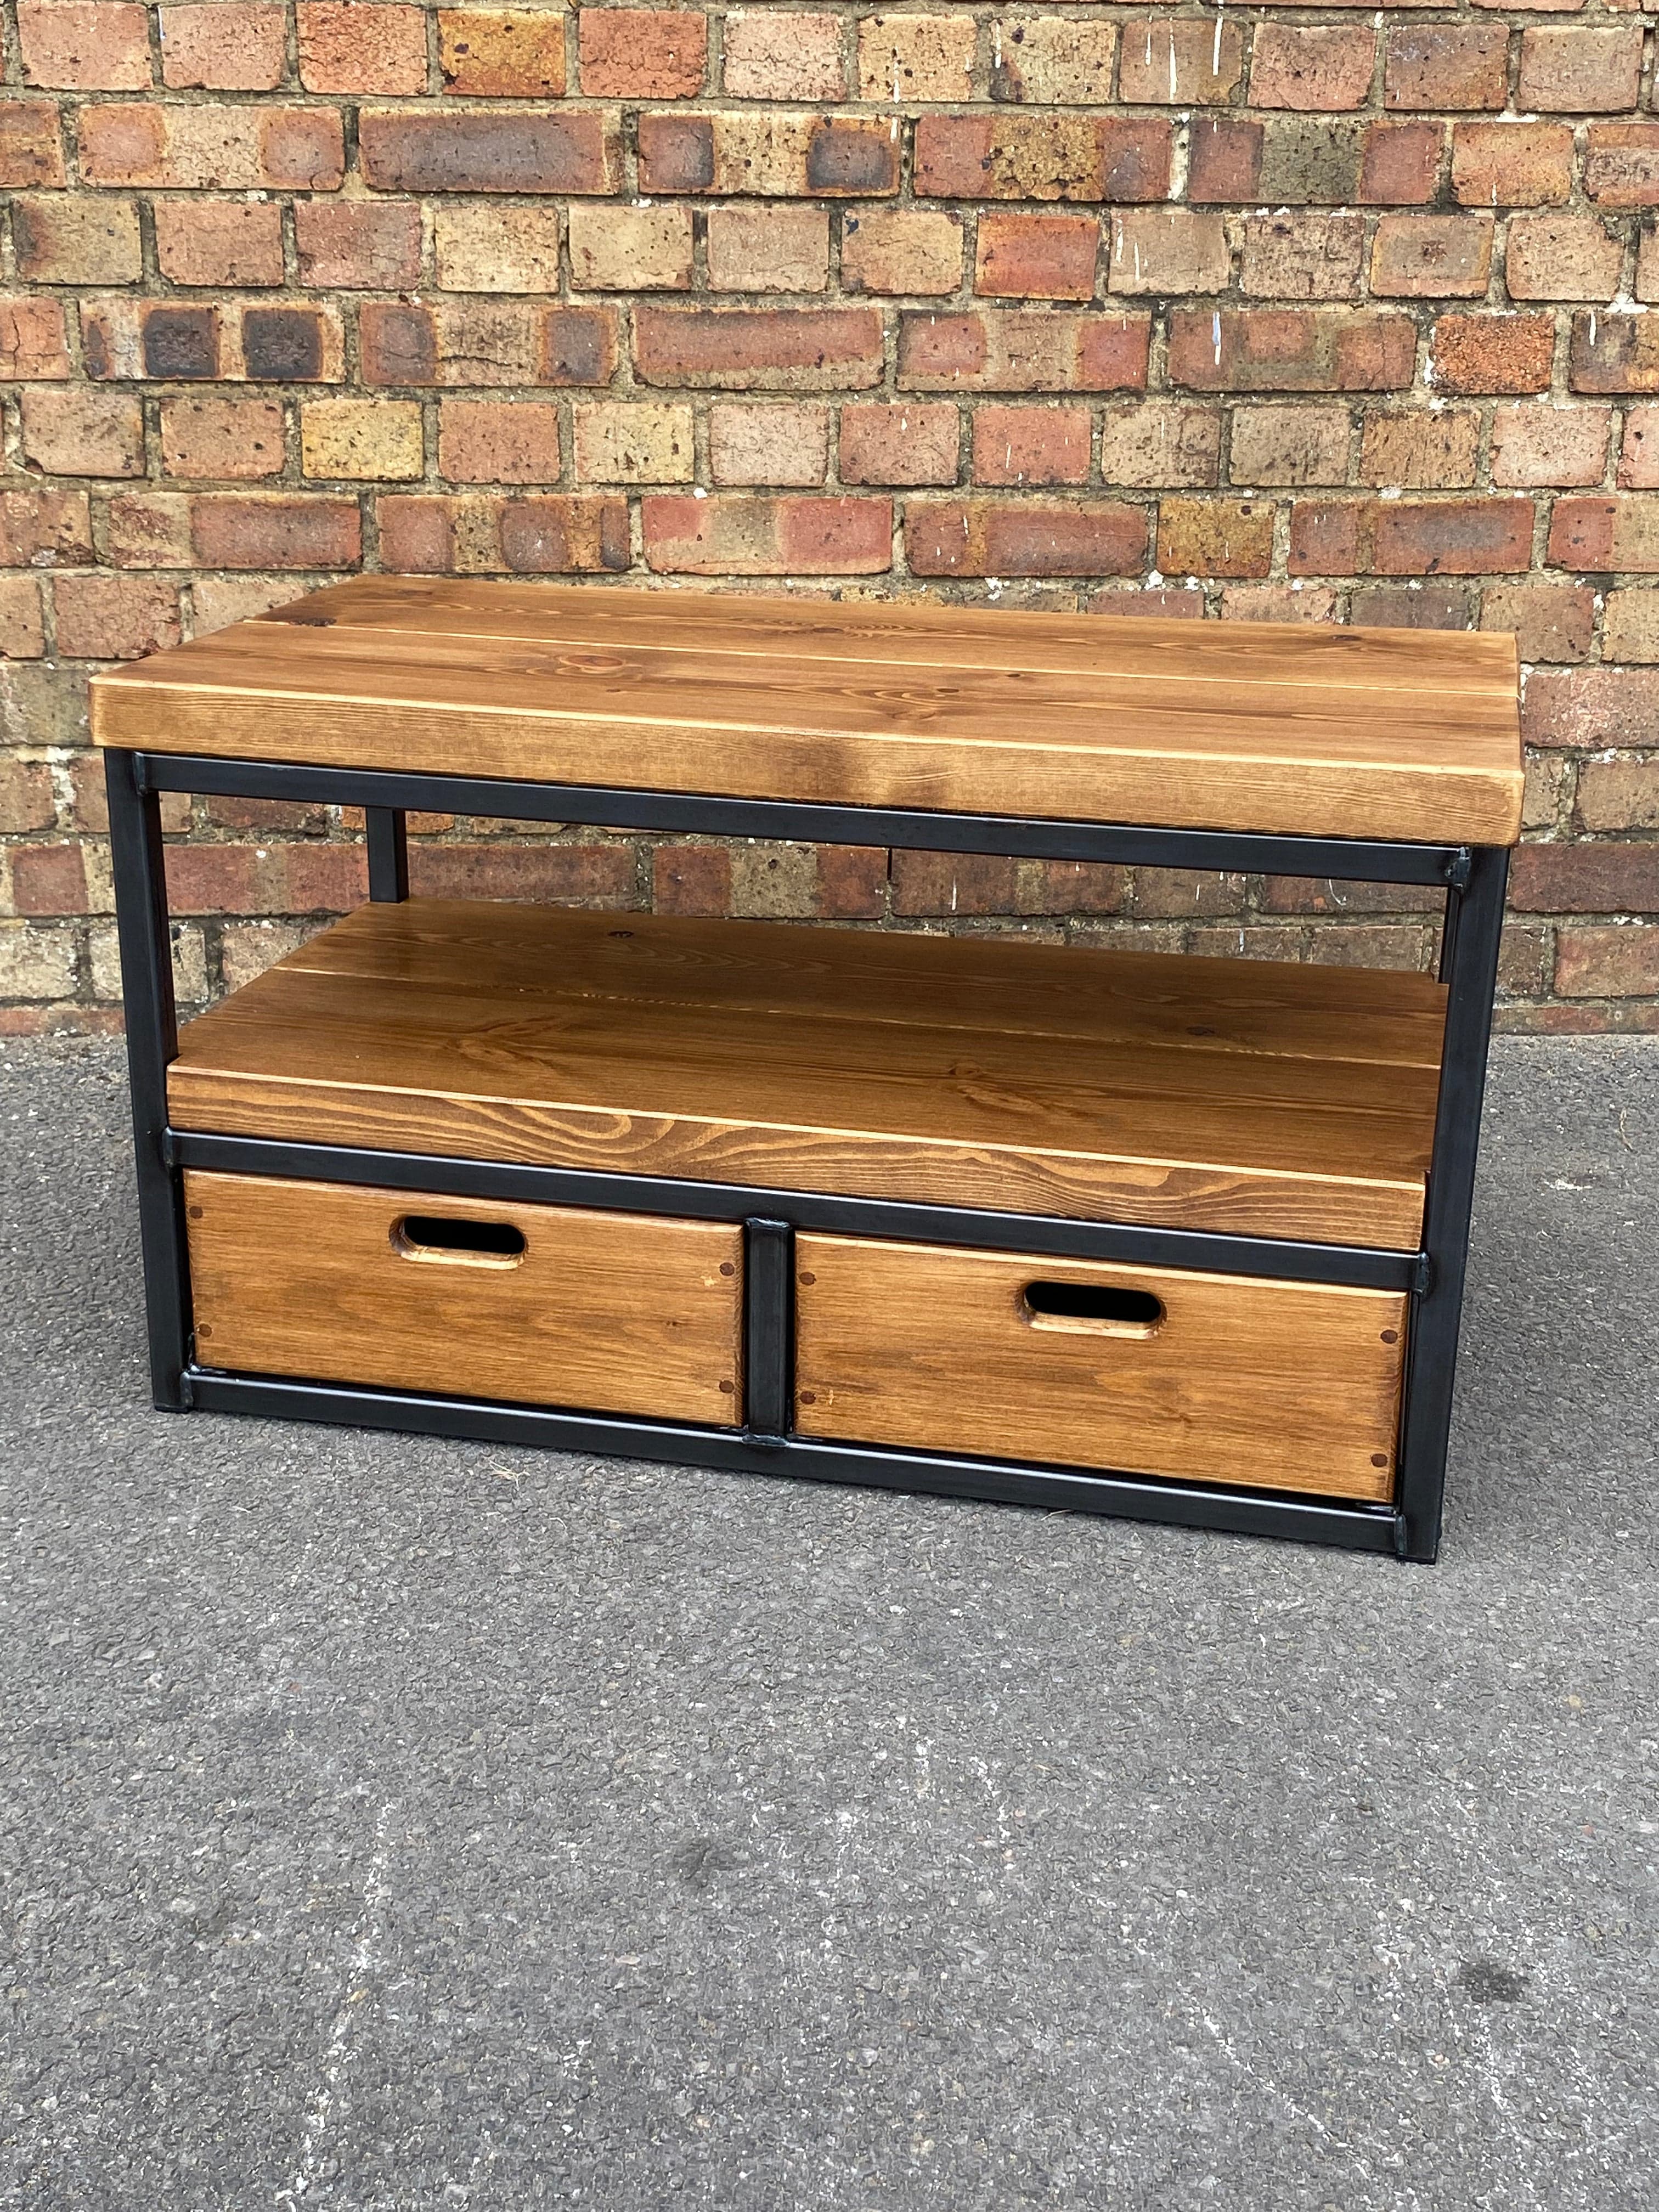 Small Rustic & Industrial TV Unit Stand with drawers  RSD Furniture   